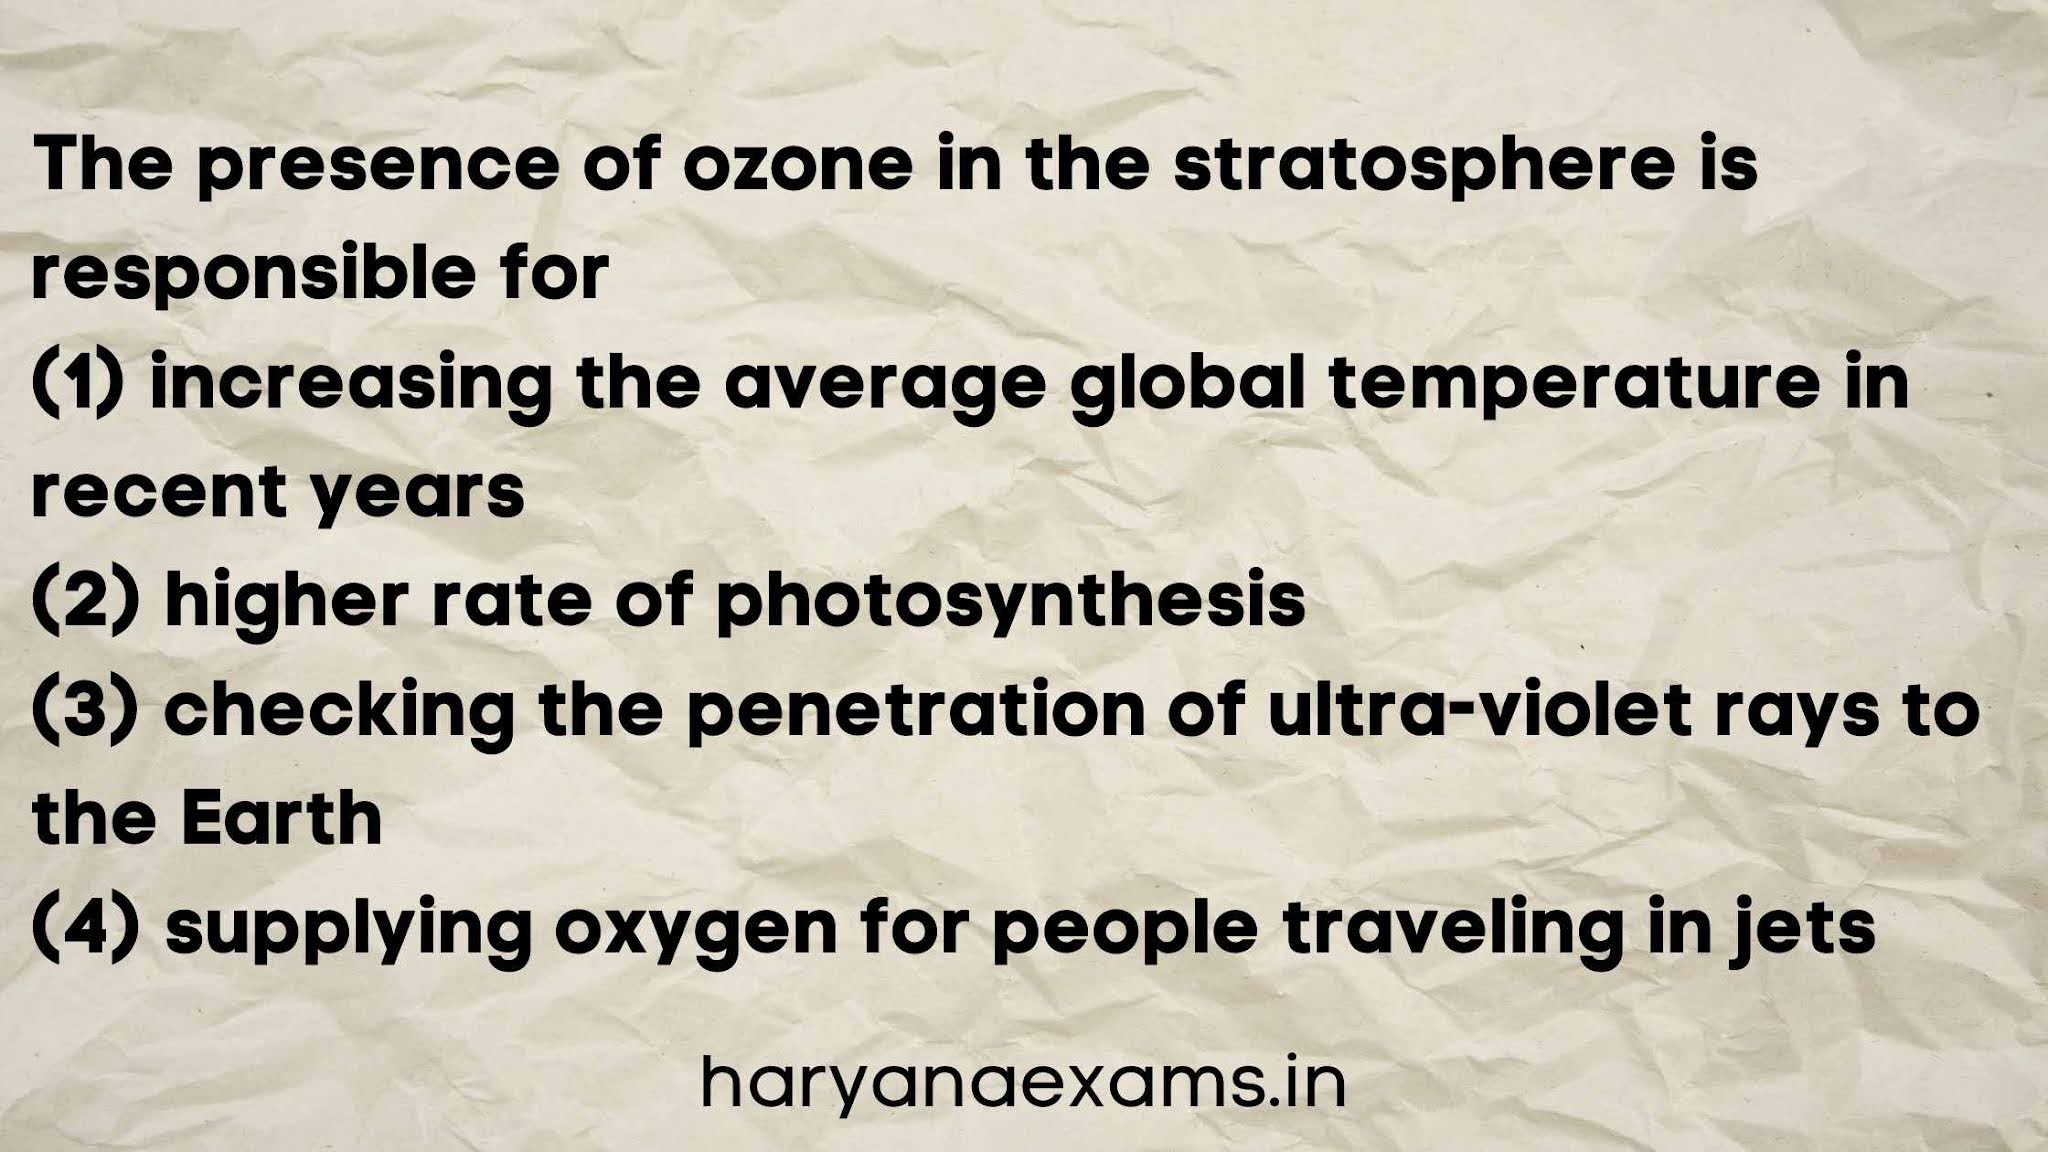 The presence of ozone in the stratosphere is responsible for   (1) increasing the average global temperature in recent years   (2) higher rate of photosynthesis   (3) checking the penetration of ultra-violet rays to the Earth   (4) supplying oxygen for people traveling in jets